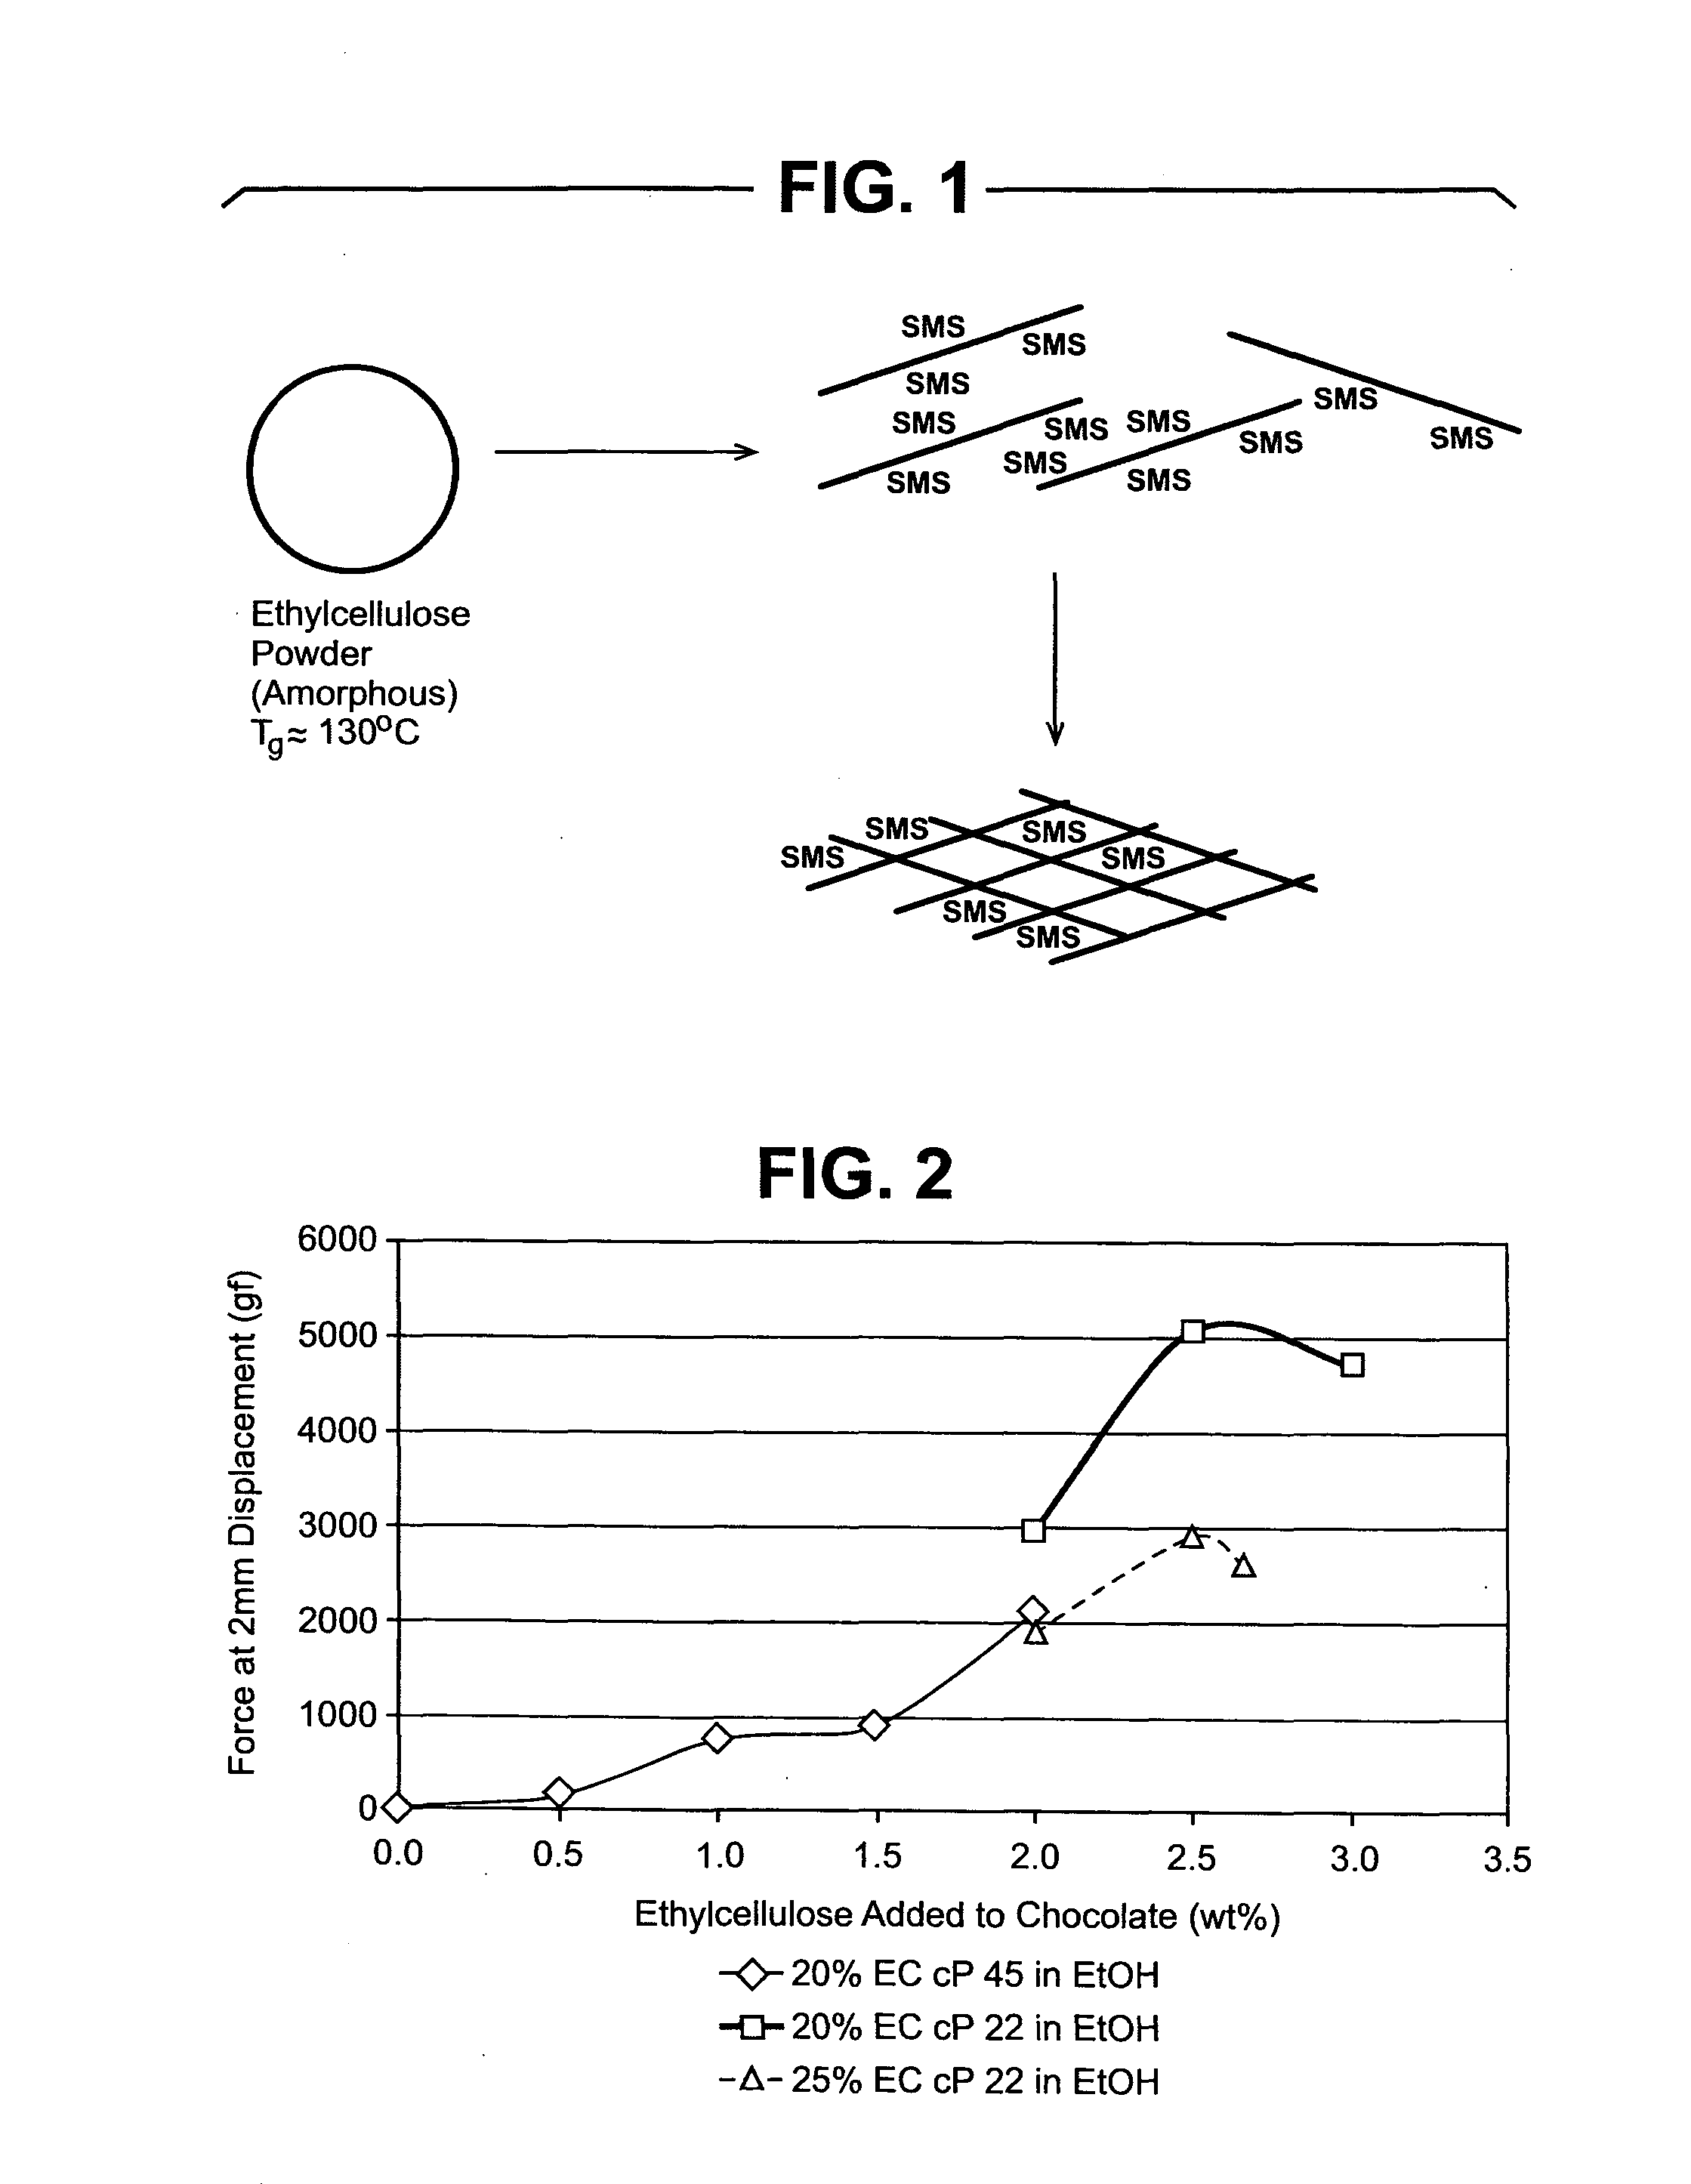 Chocolate compositions containing ethylcellulose